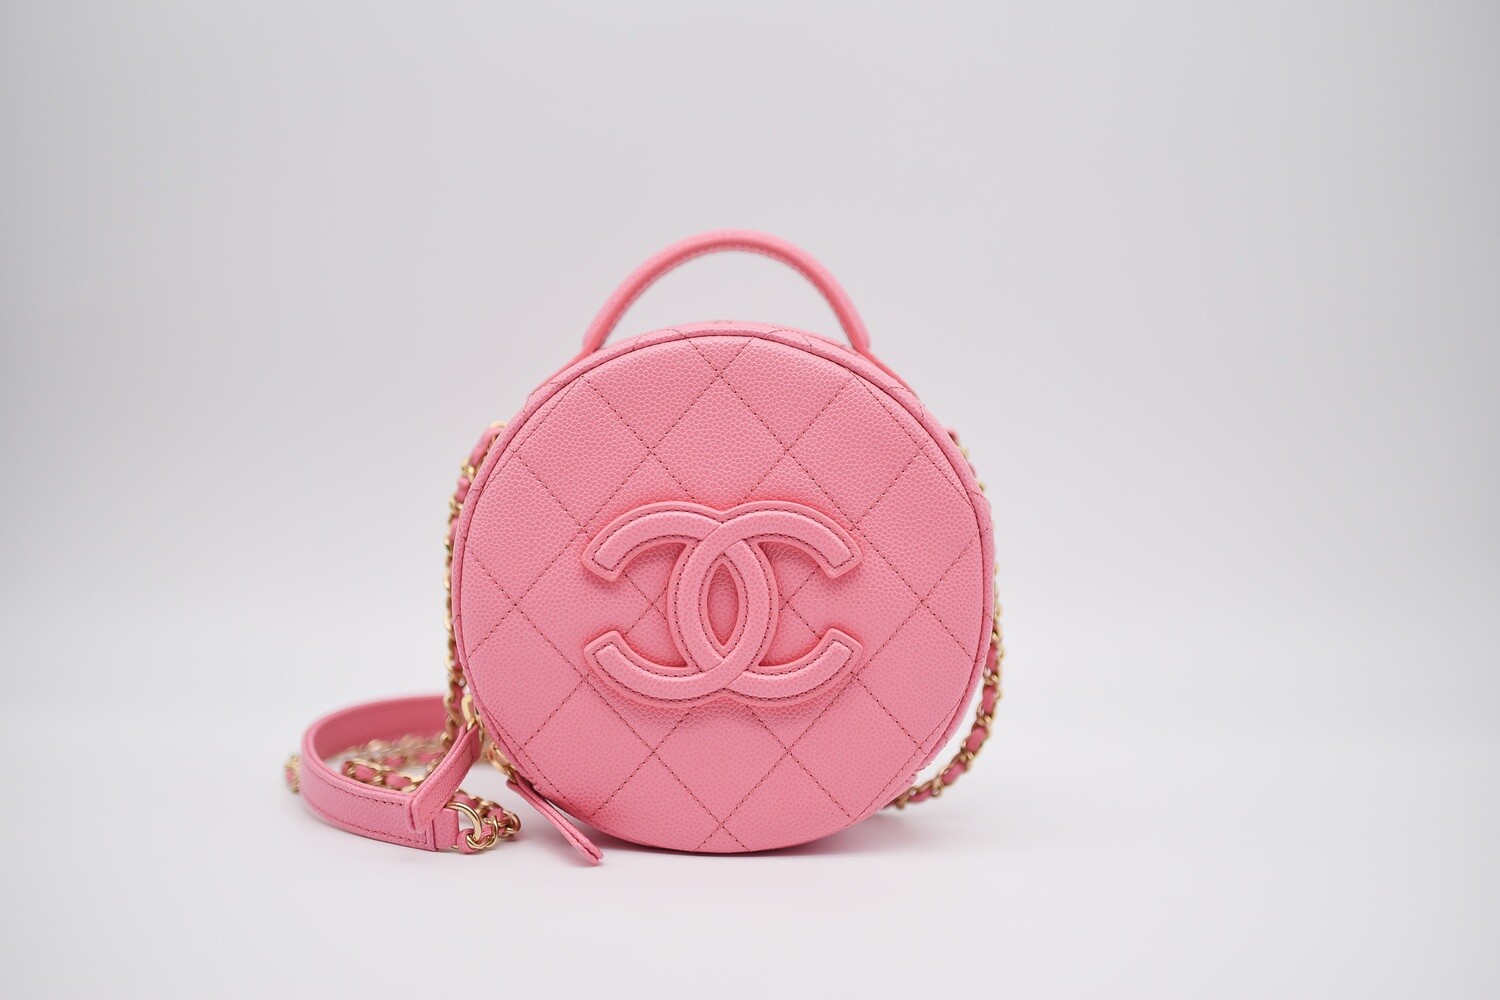 chanel tote pink